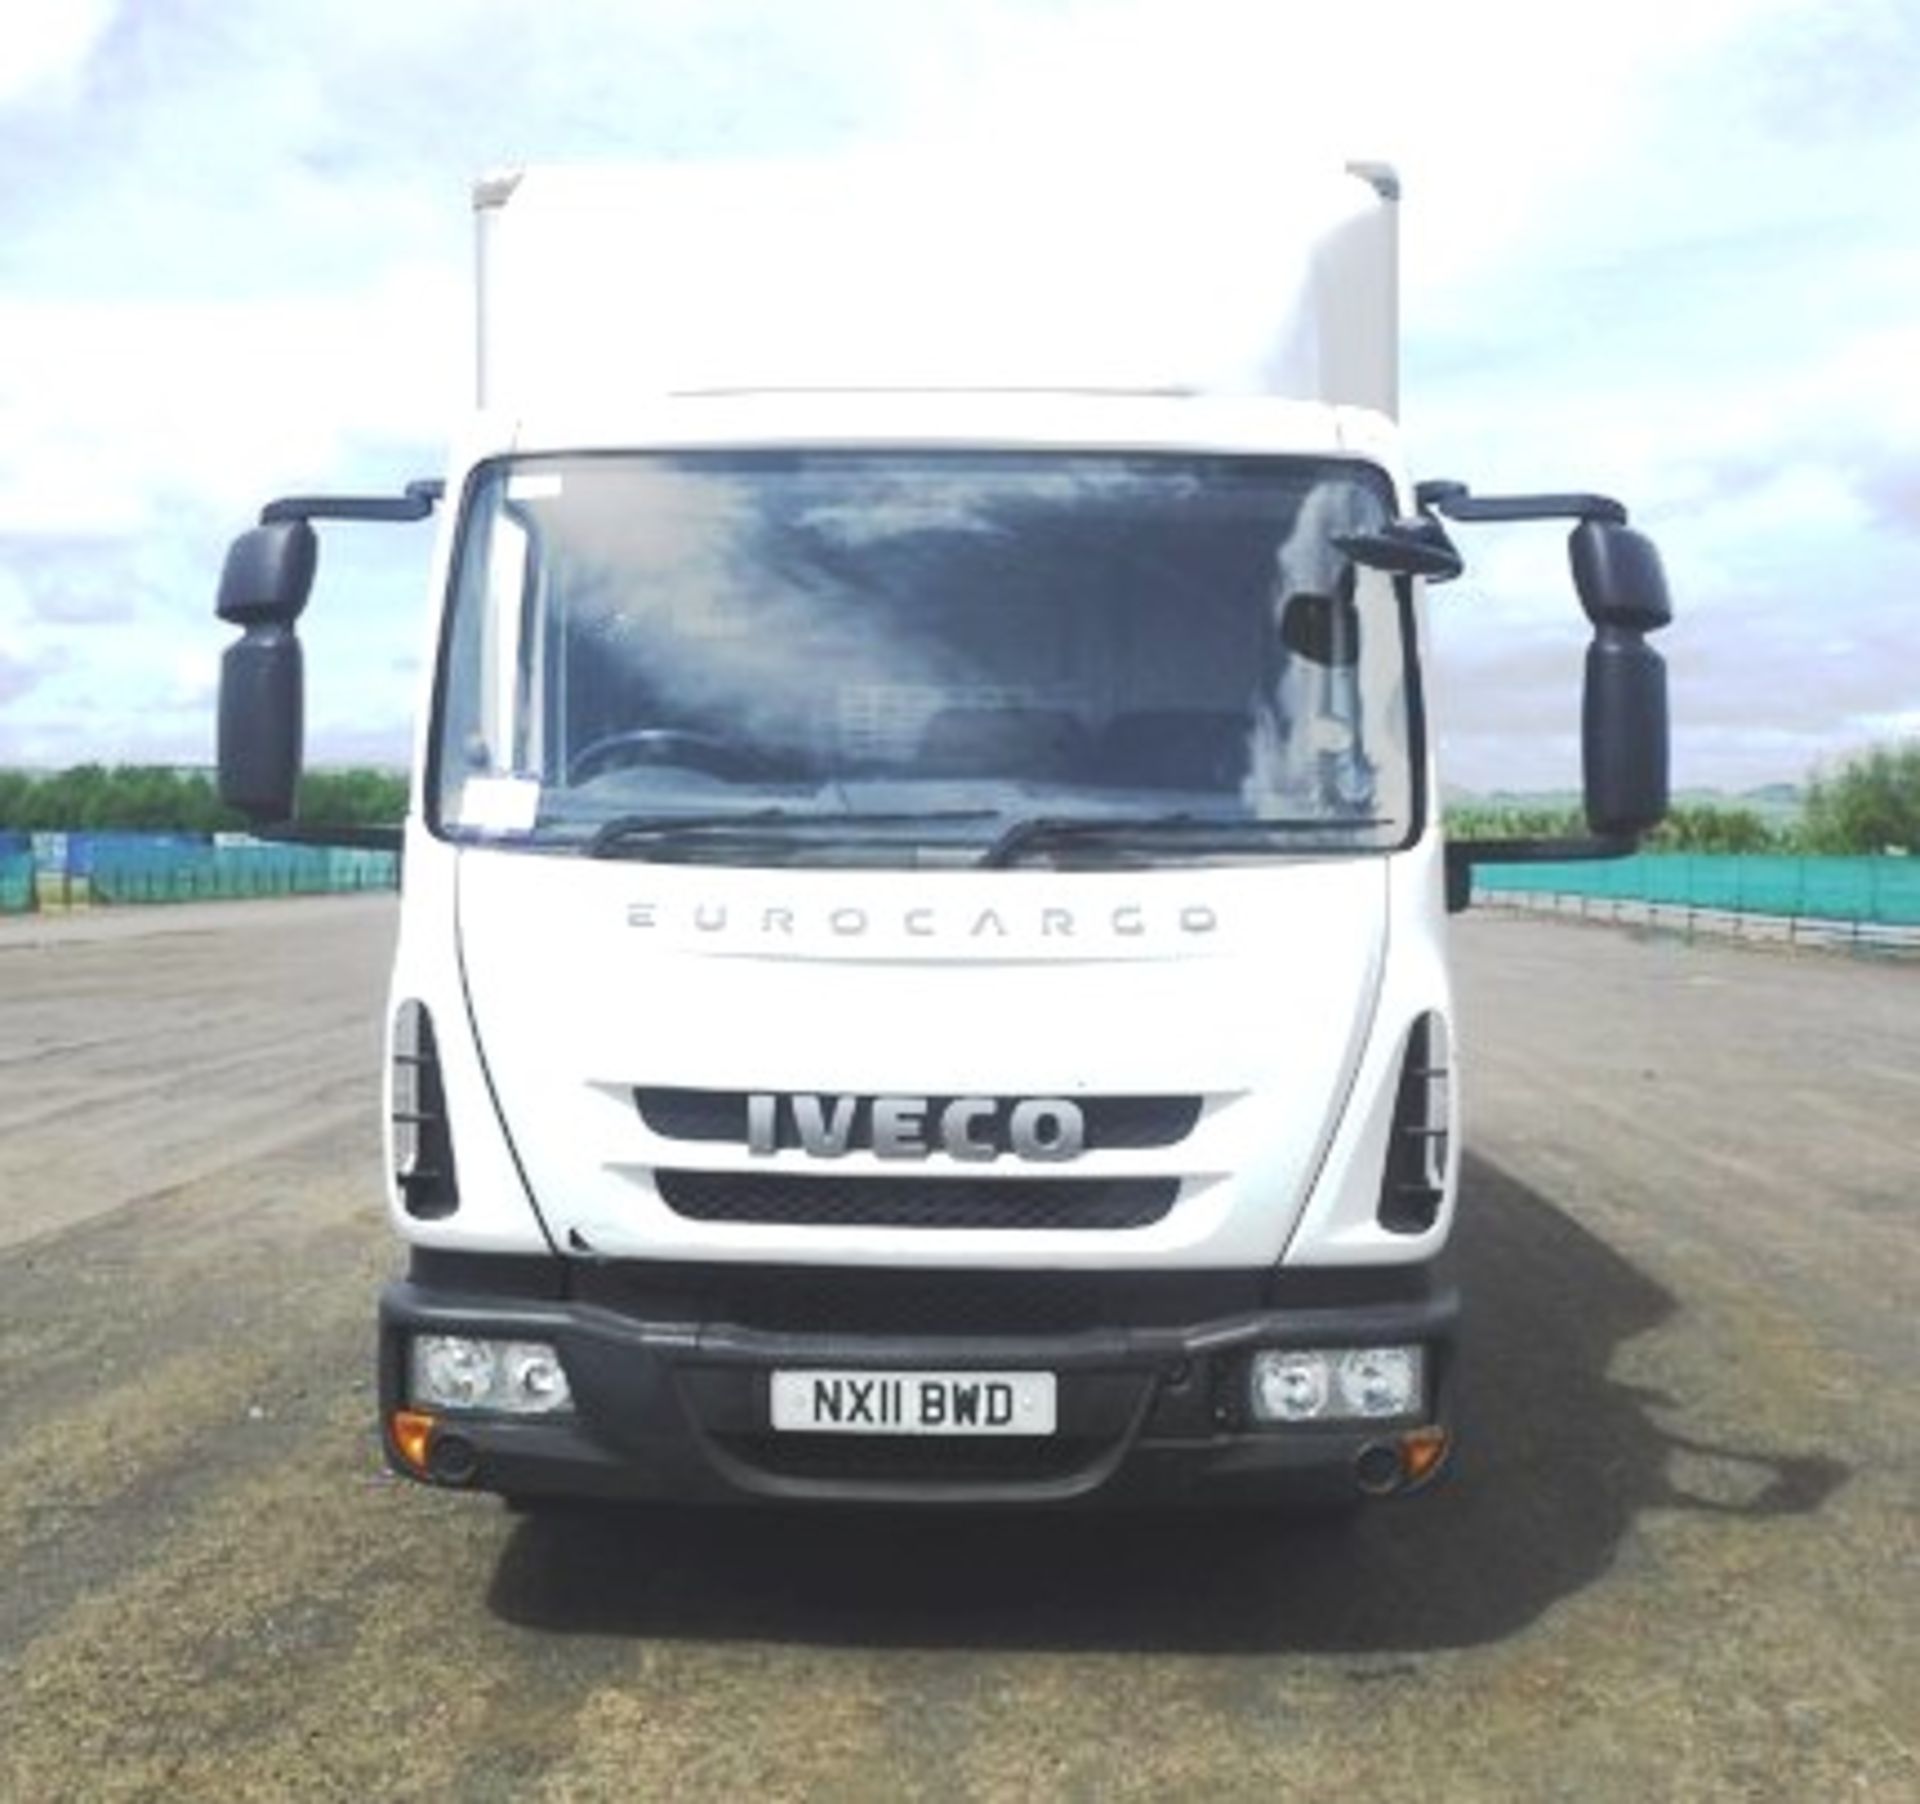 IVECO MODEL EUROCARGO (MY 2008) - 3920cc - Image 2 of 20